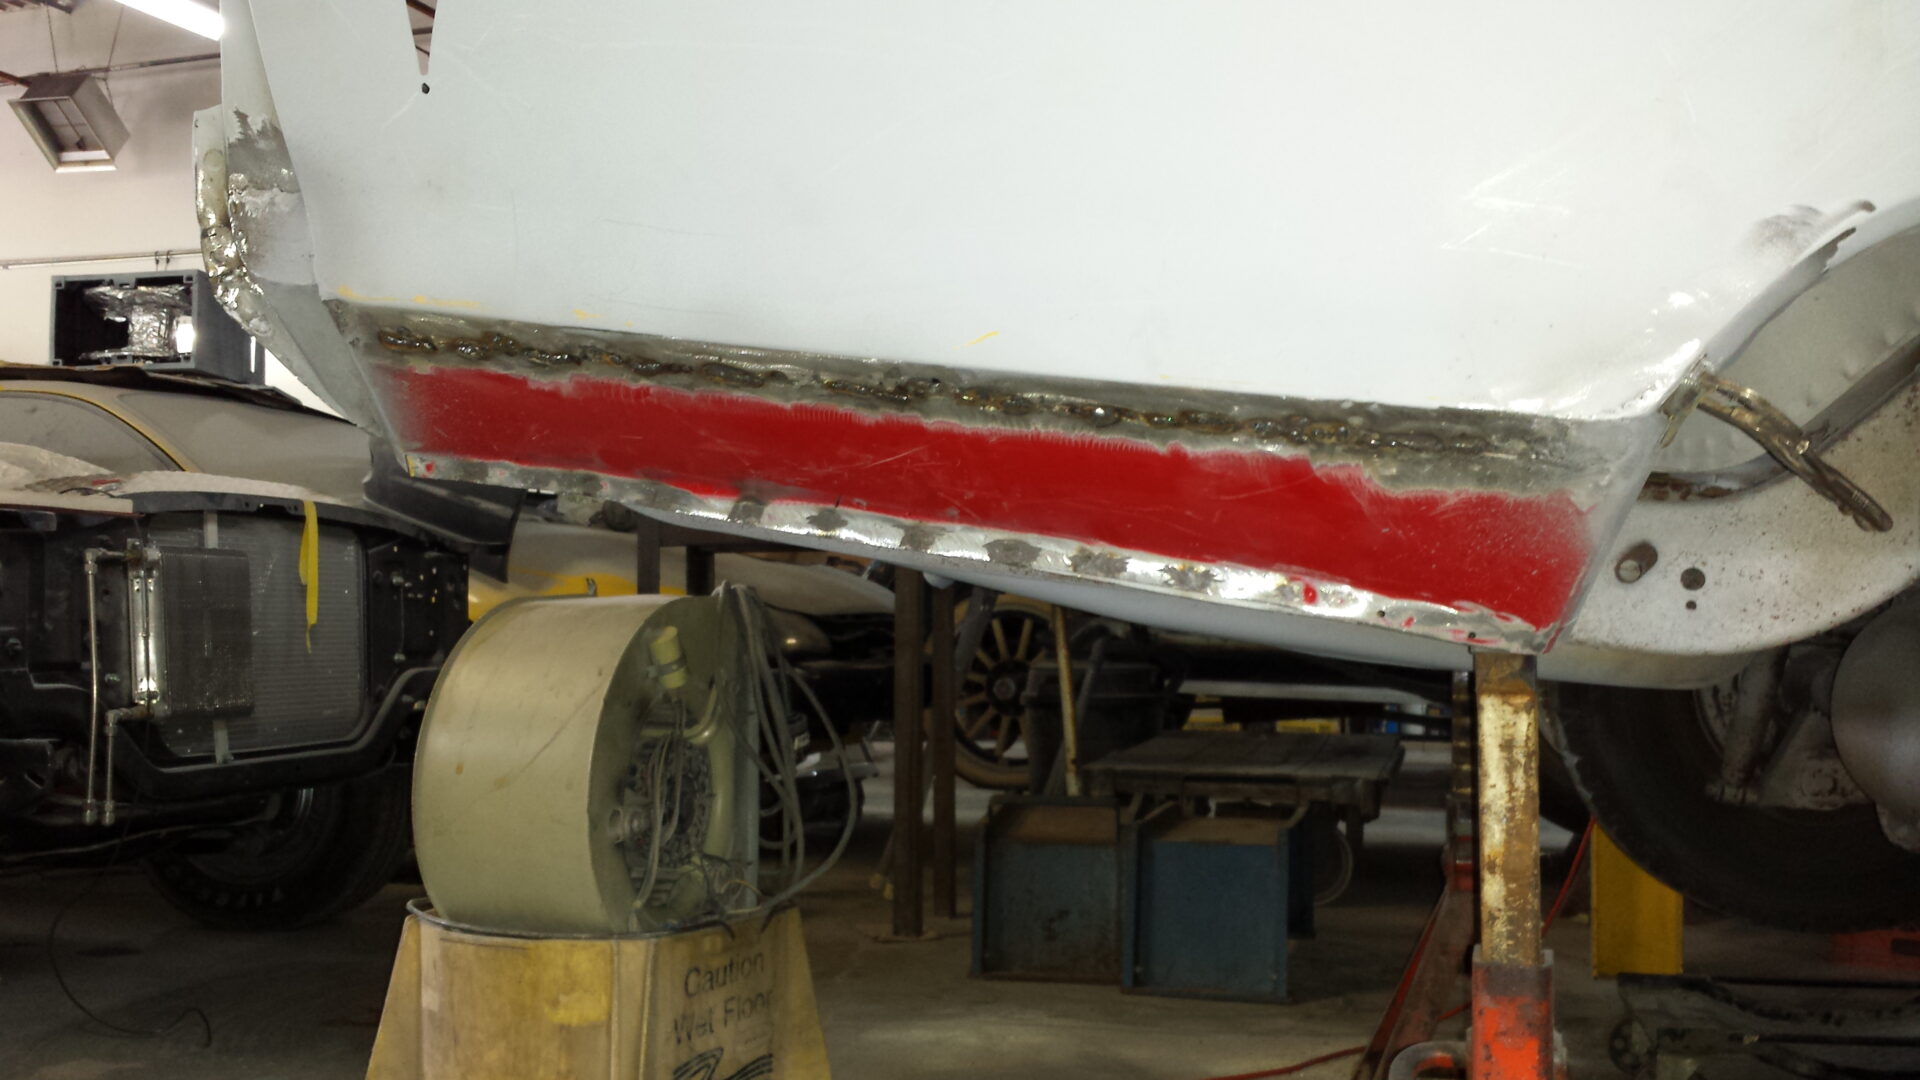 A repaired portion of the 1965 Pontiac Grand Prix